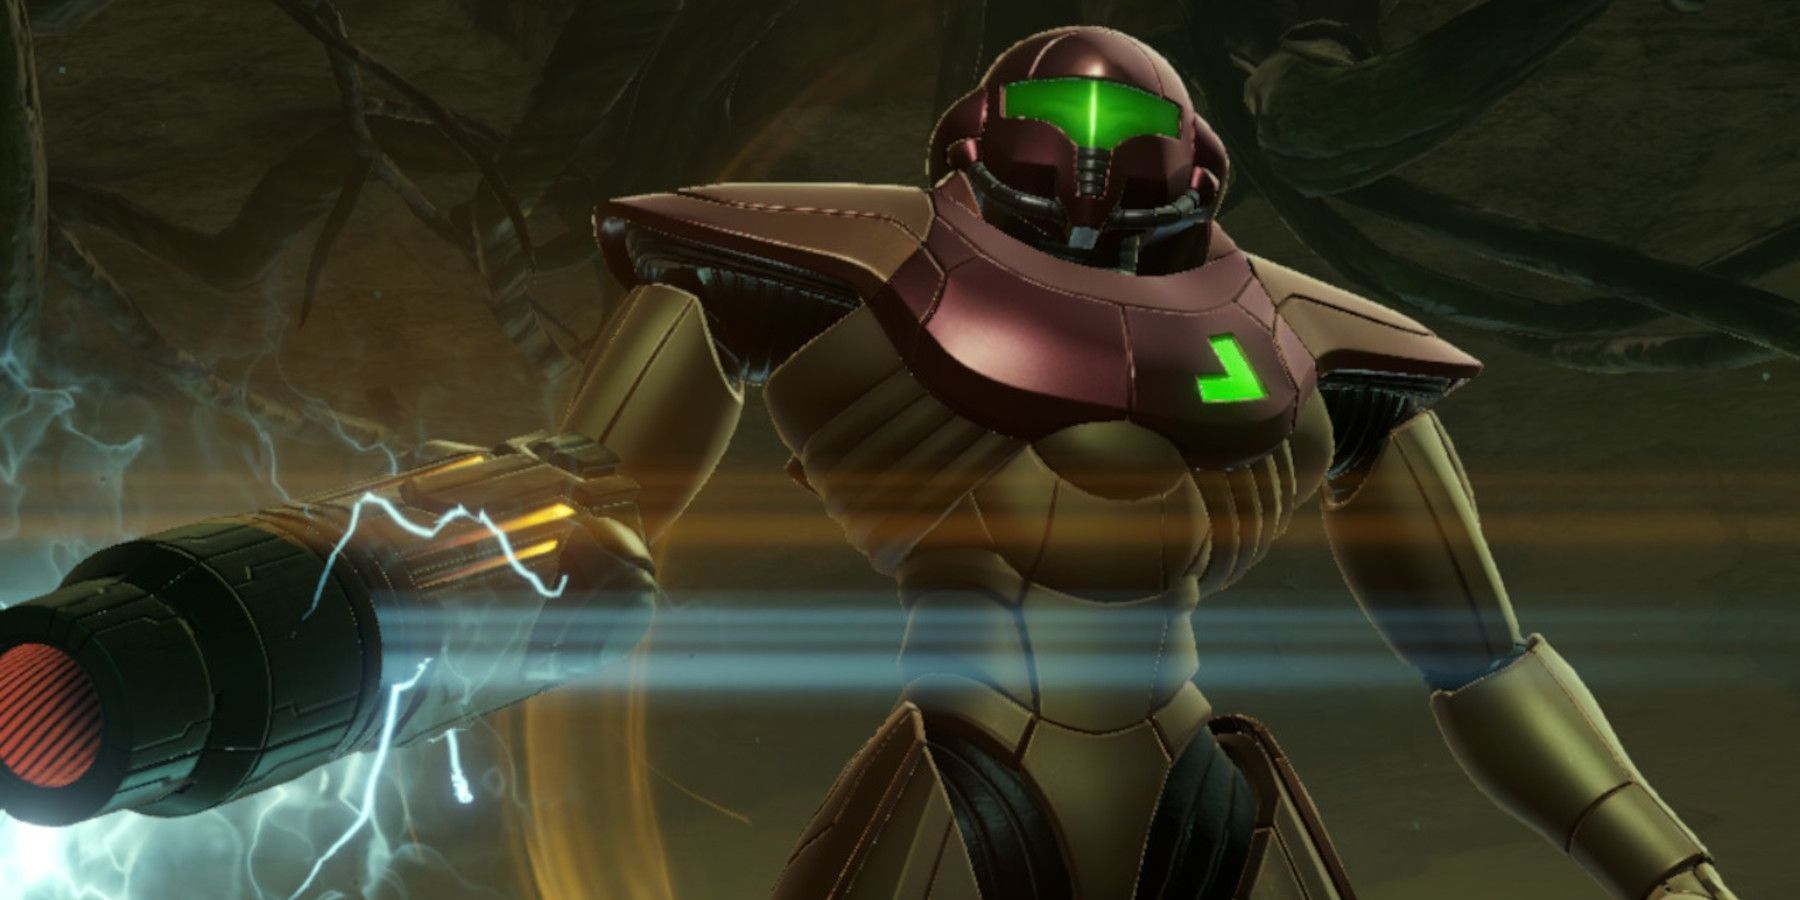 metroid prime remastered where after landing